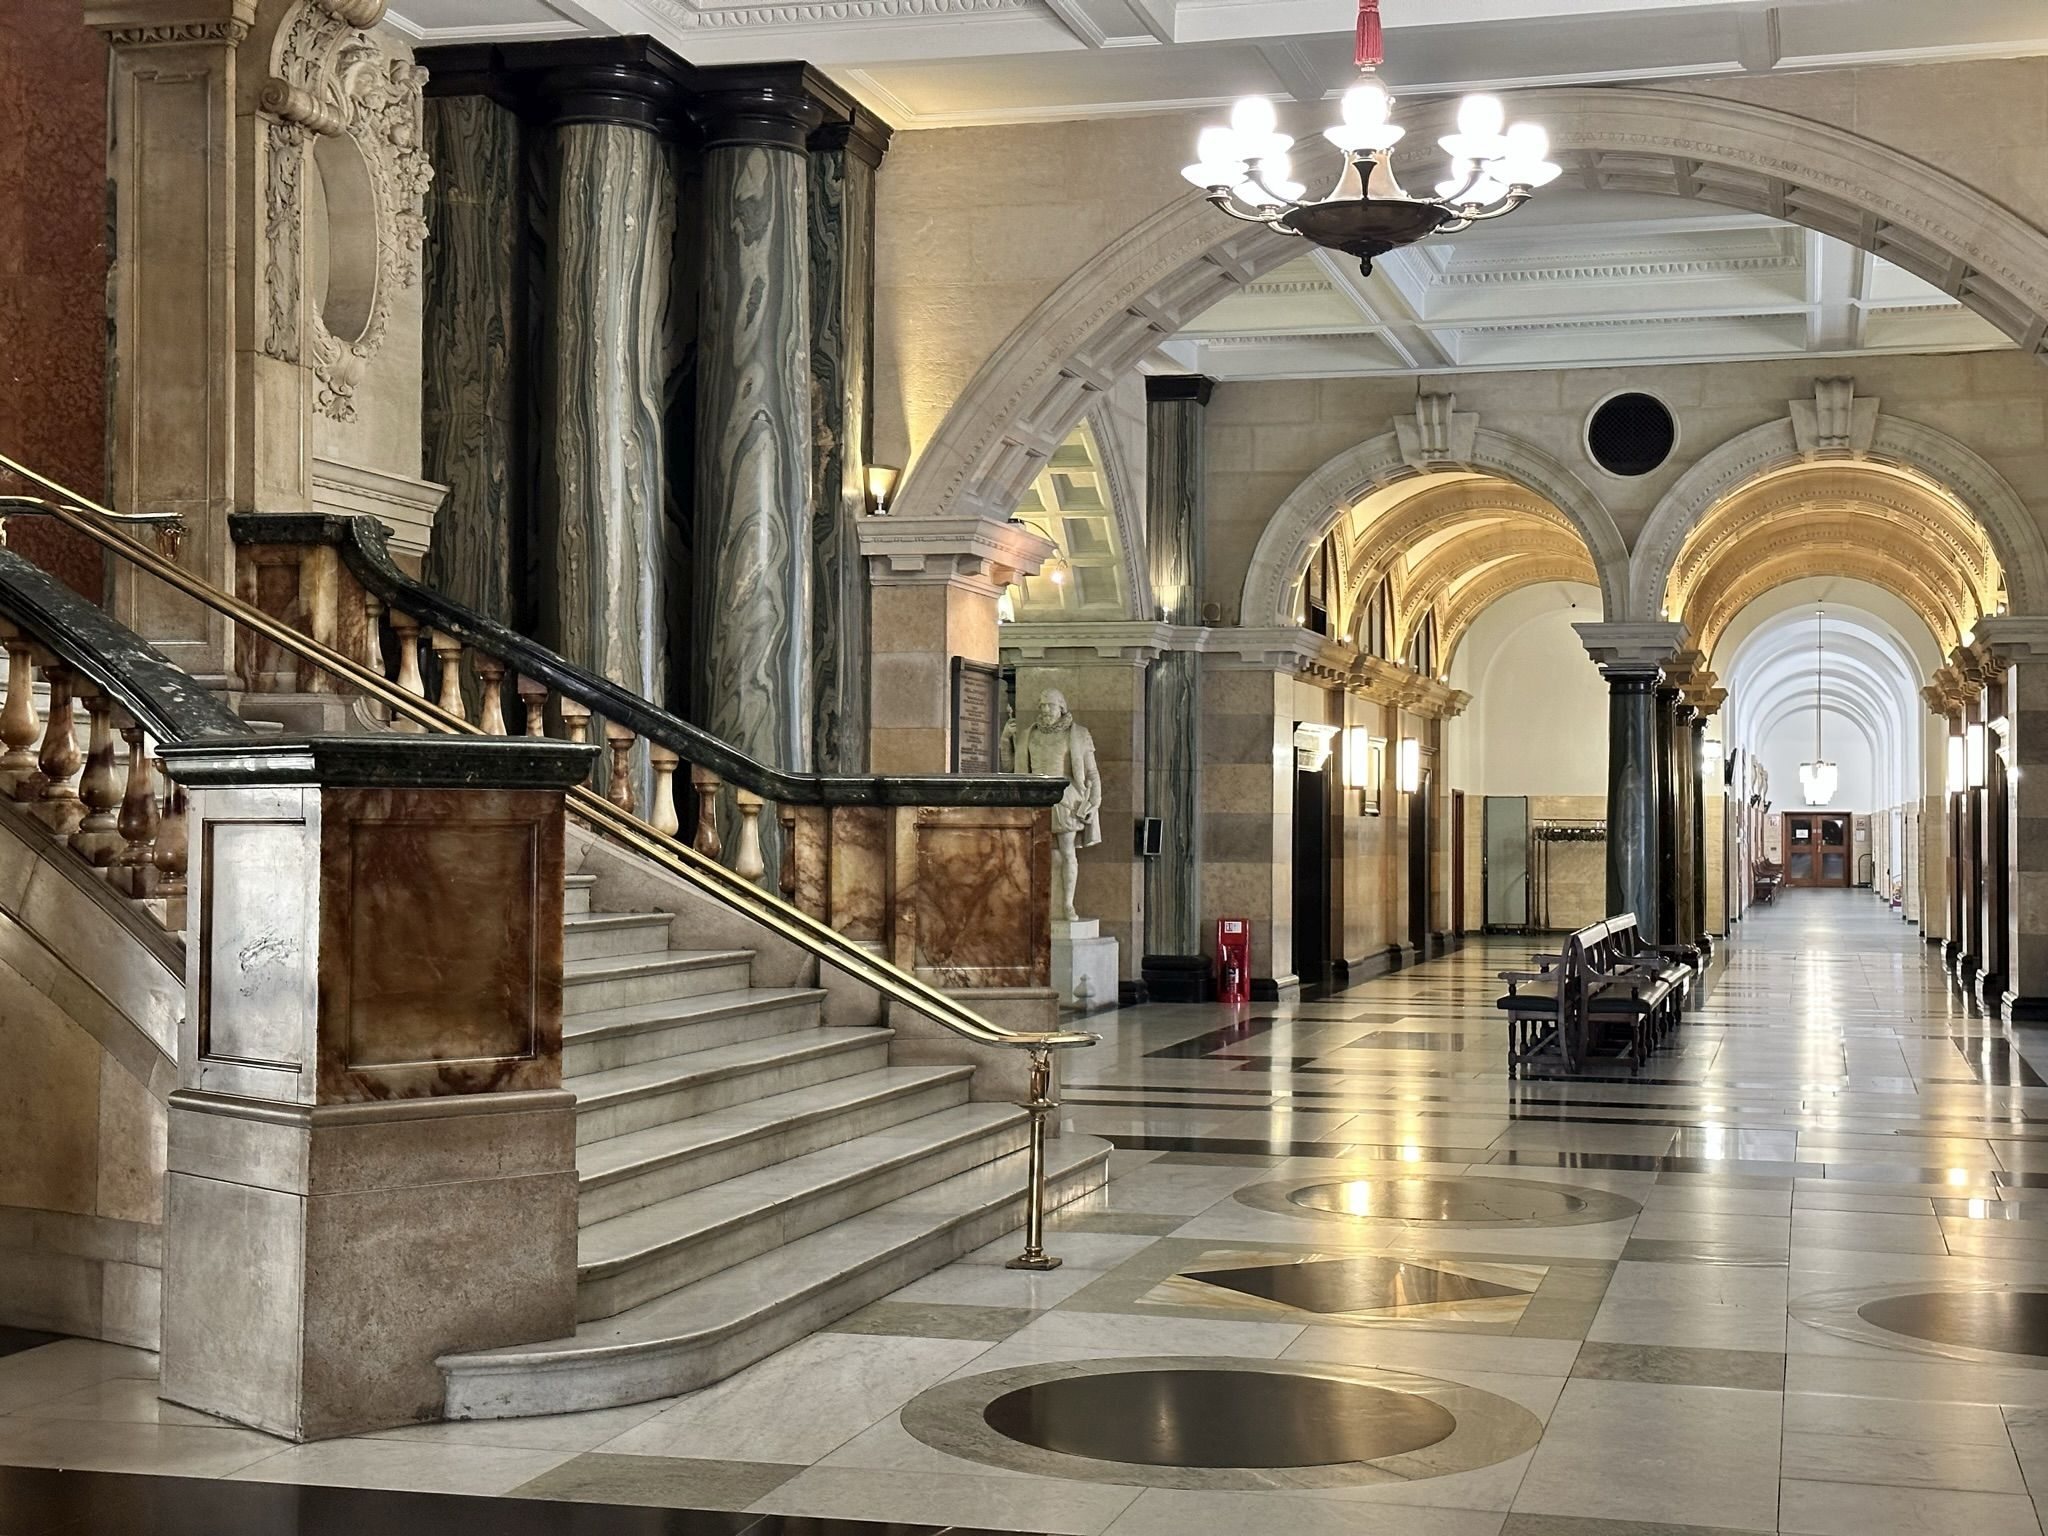 Interior of The Old Bailey, Central Criminal Court. Located in the City of London on the site of Newgate prison.